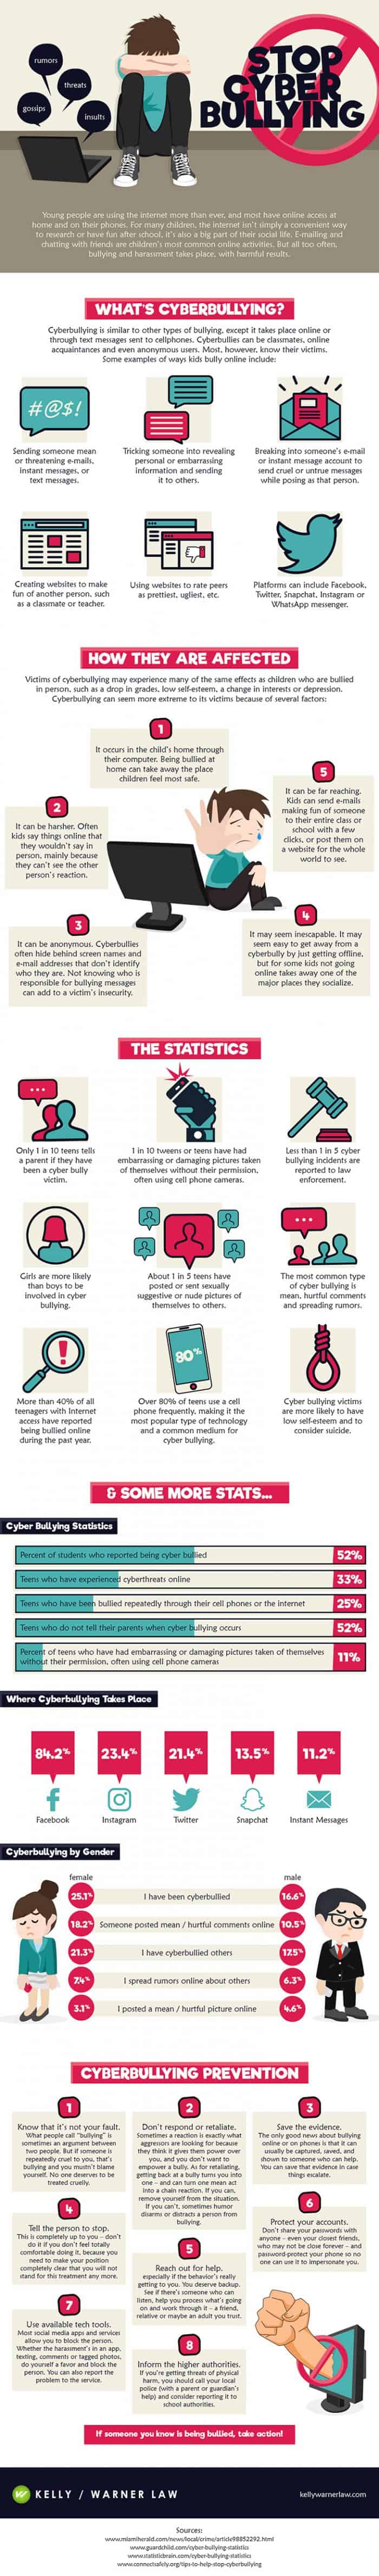 Infographic describes cyberbullying side effects and ways to prevent it